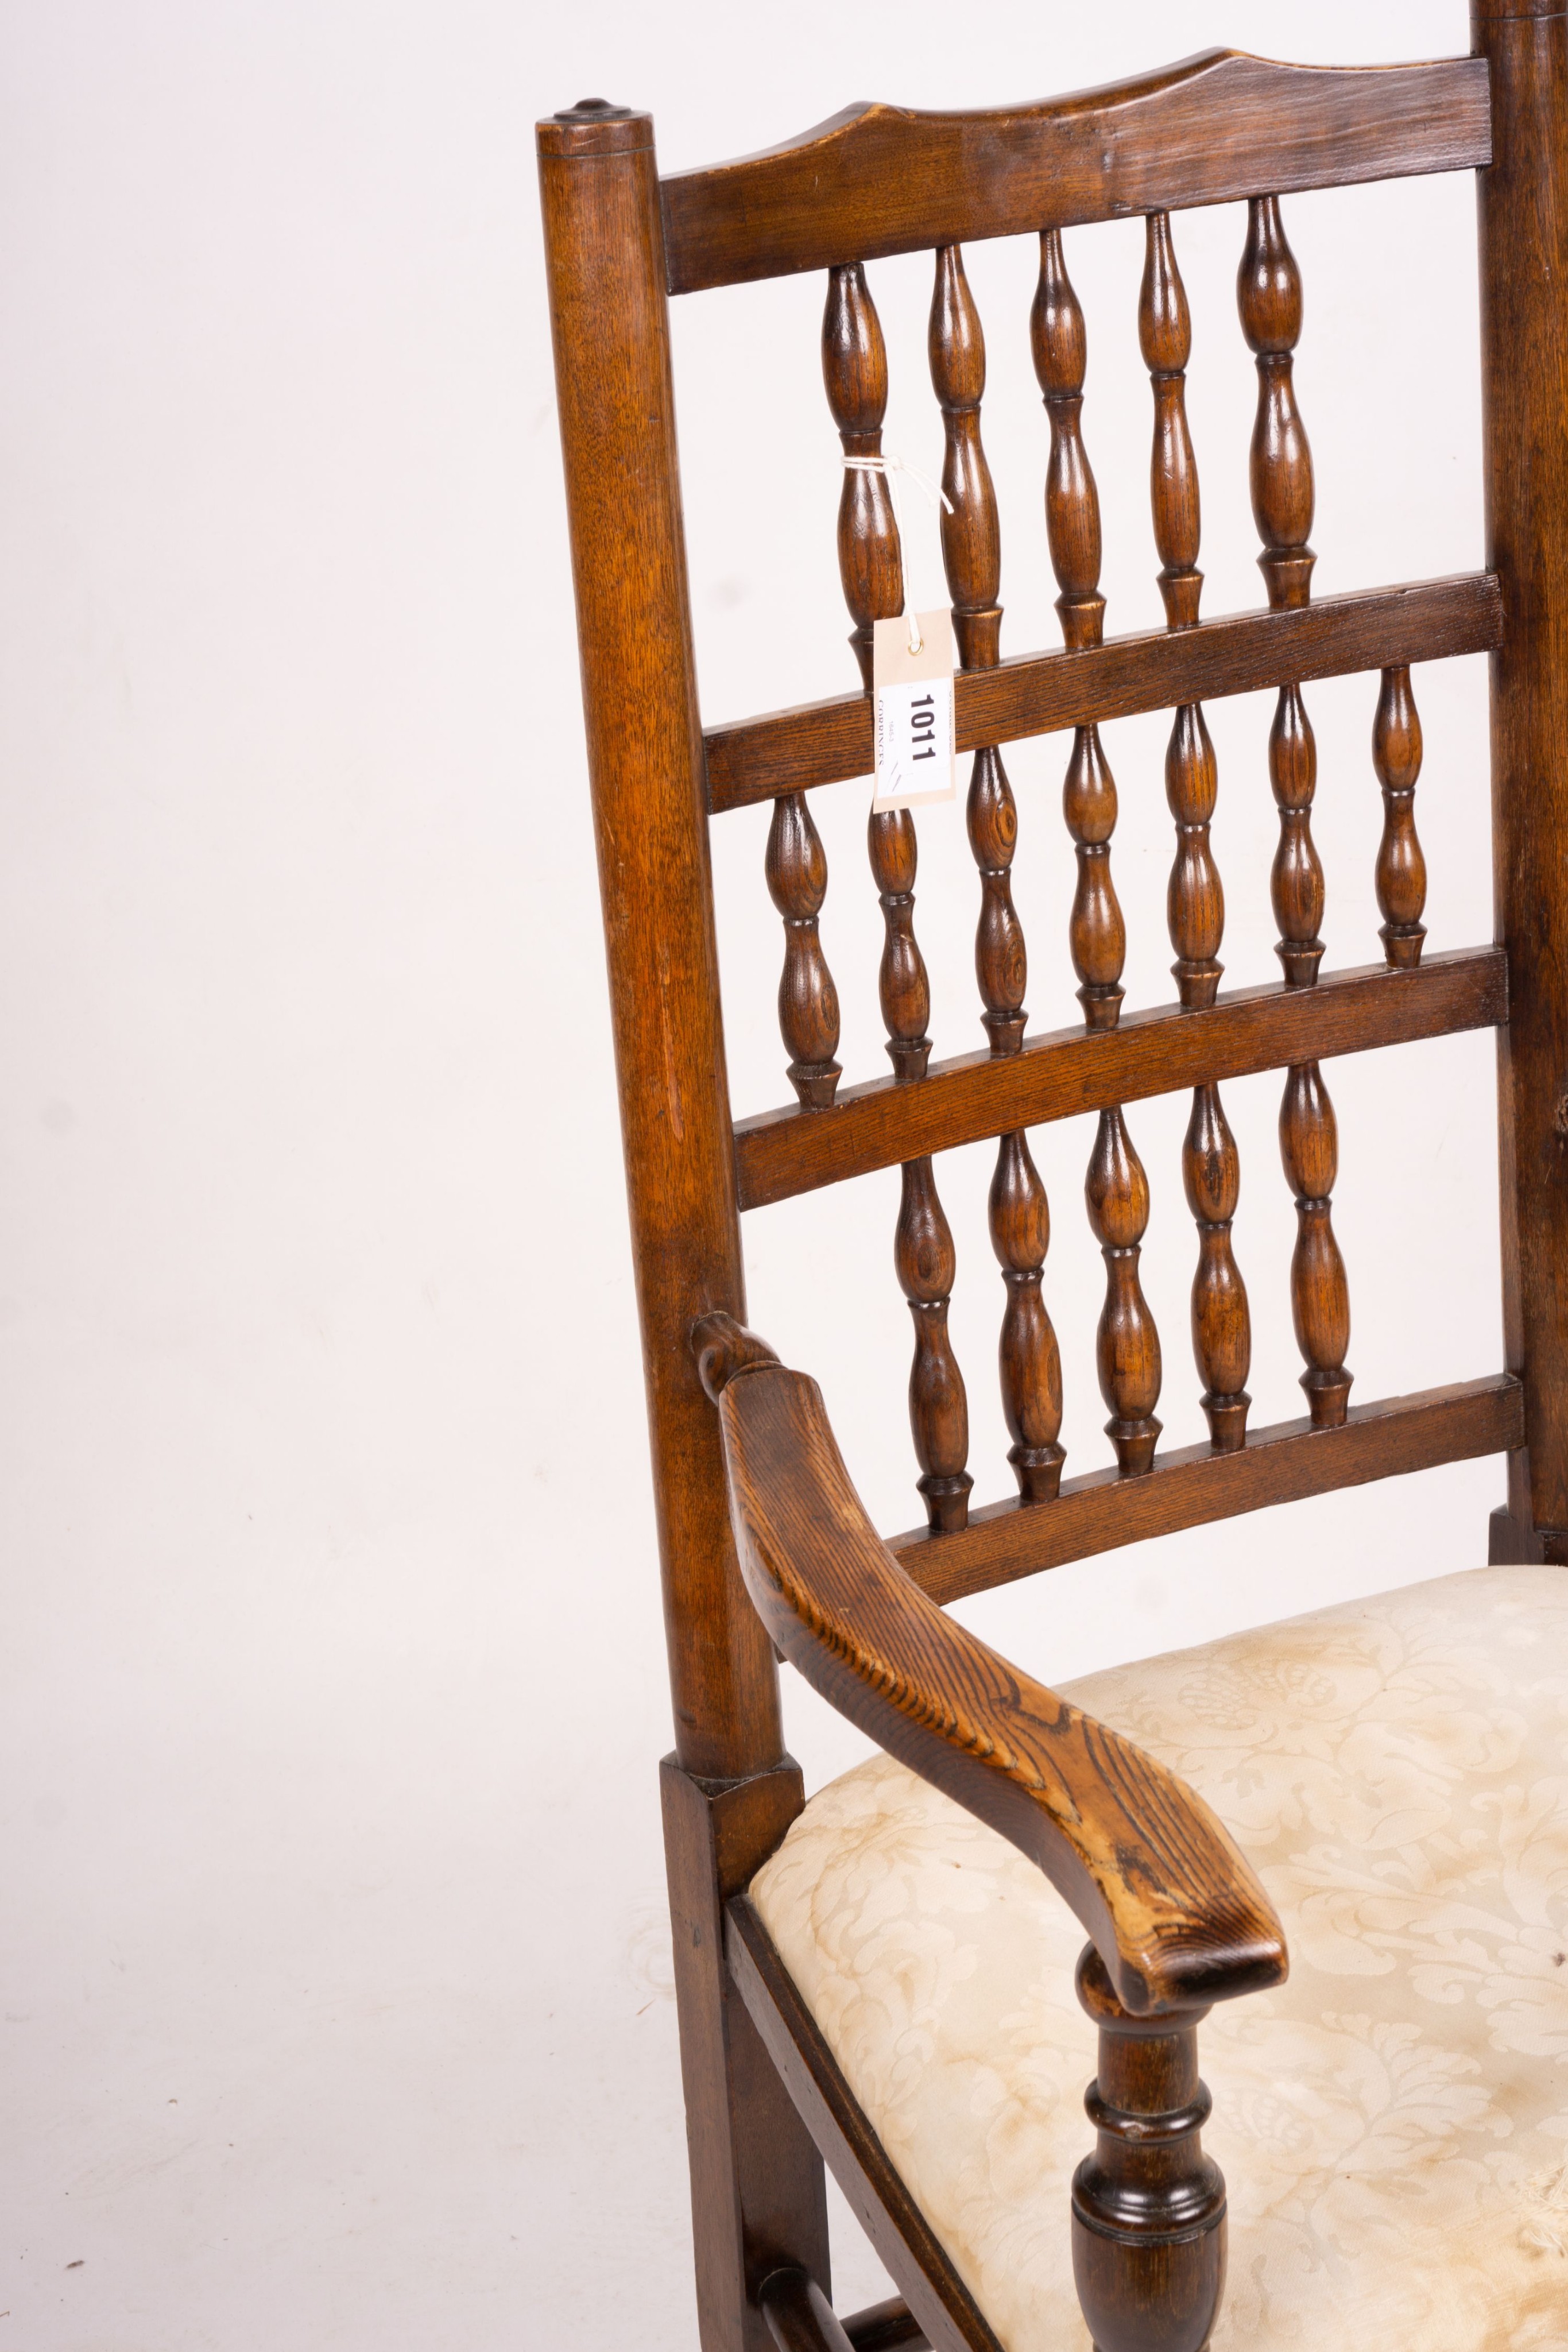 An 18th century style Lancashire ash and beech spindle back dining chair